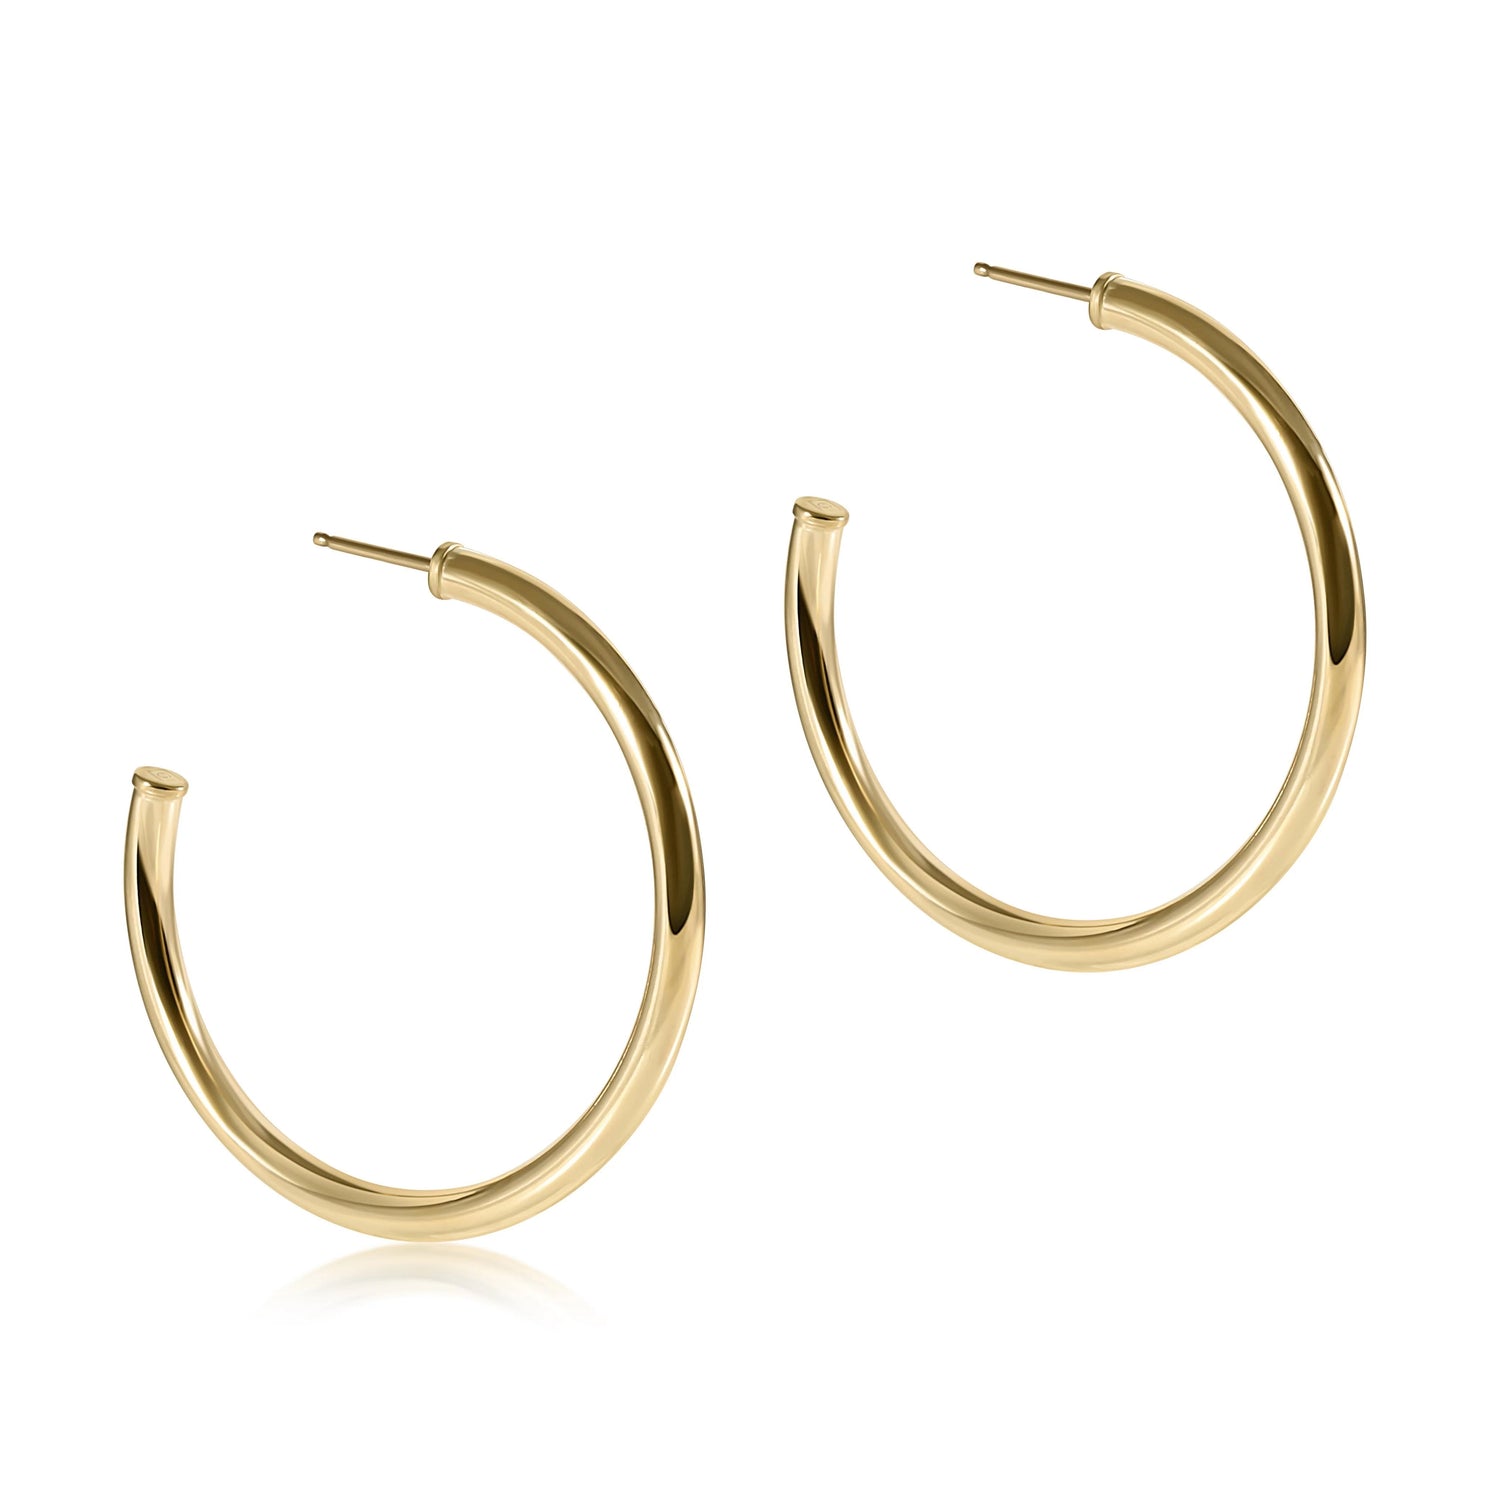 Round 3mm Gold Post Hoop - Smooth - Gaines Jewelers